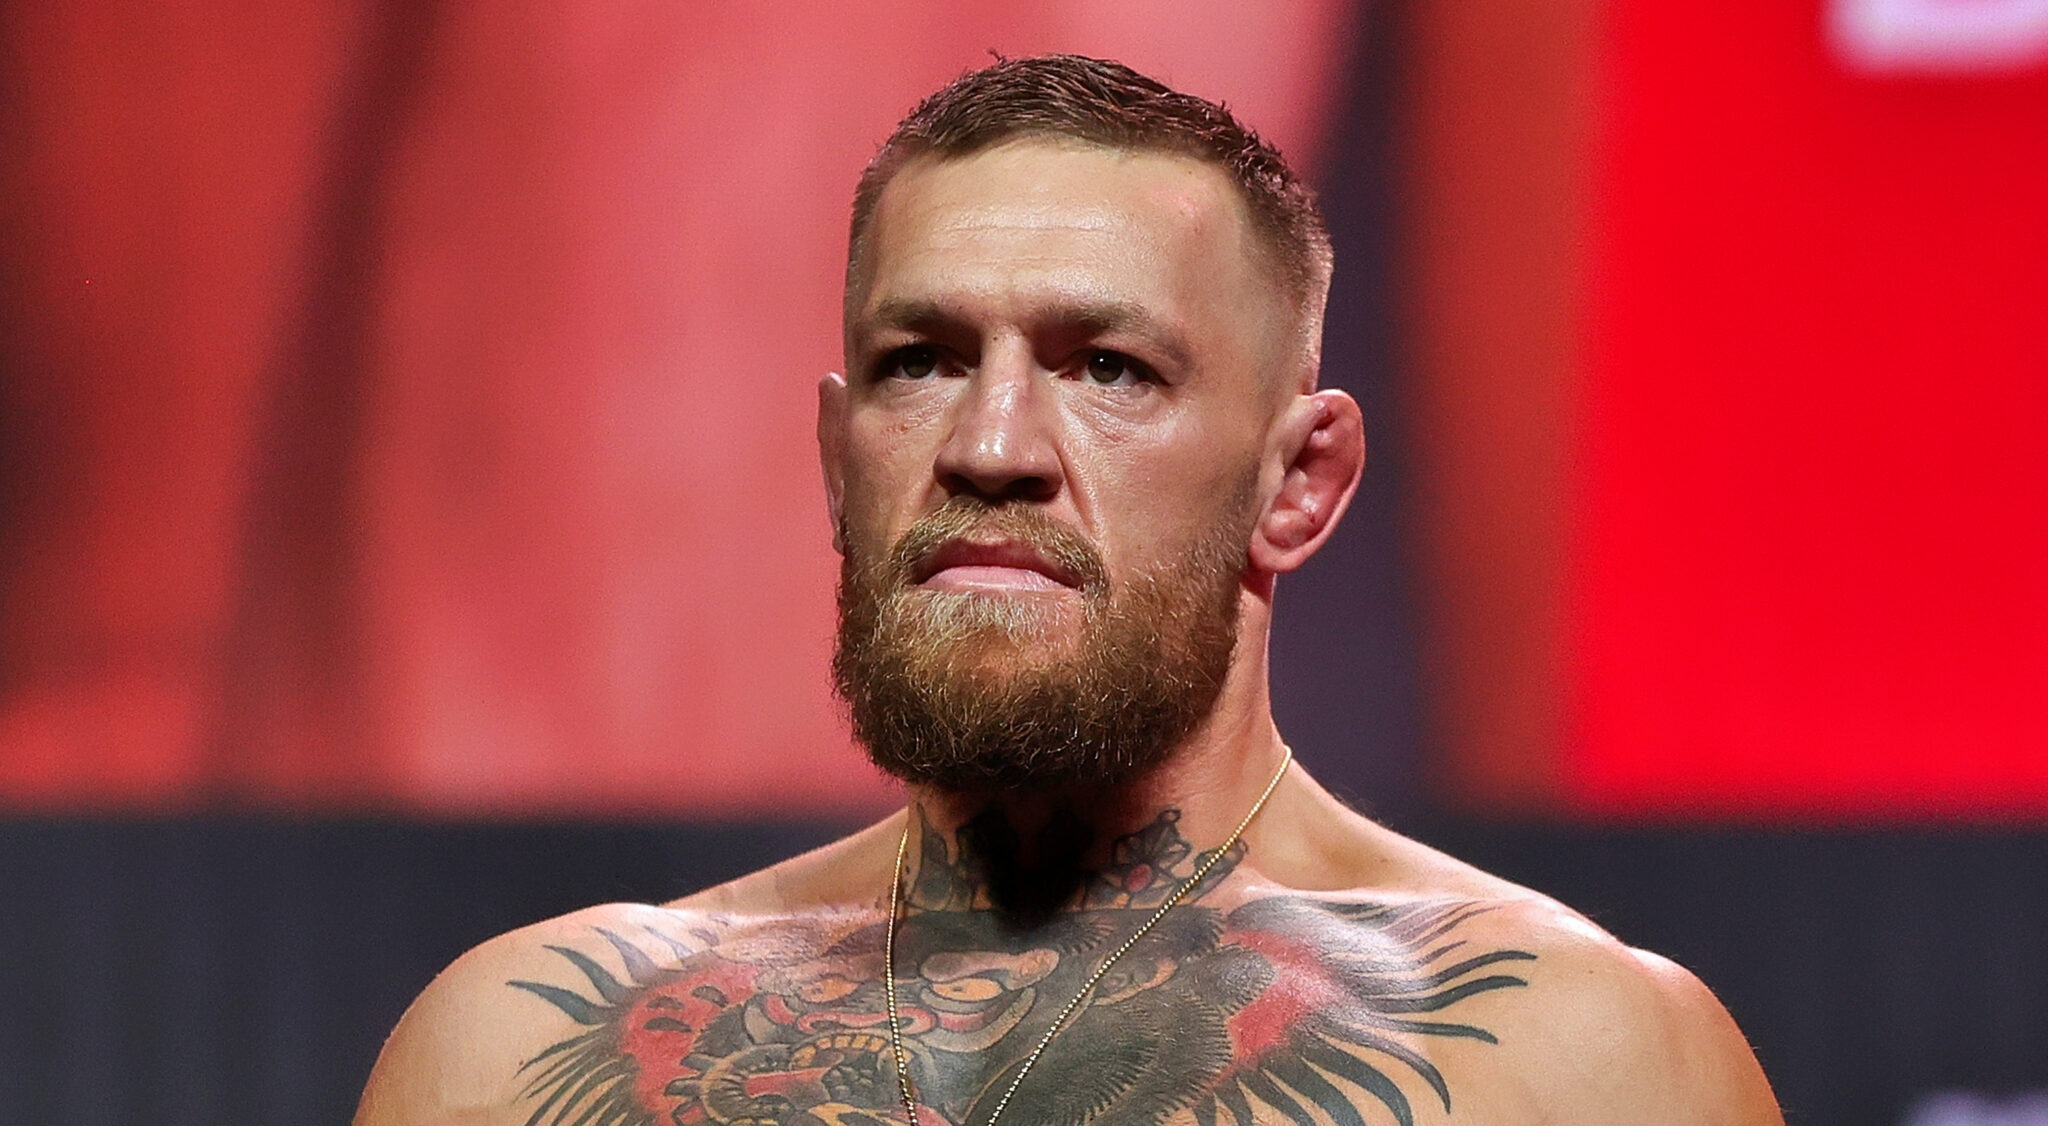 BREAKING: Conor McGregor Accused of Attacking Woman On Yacht